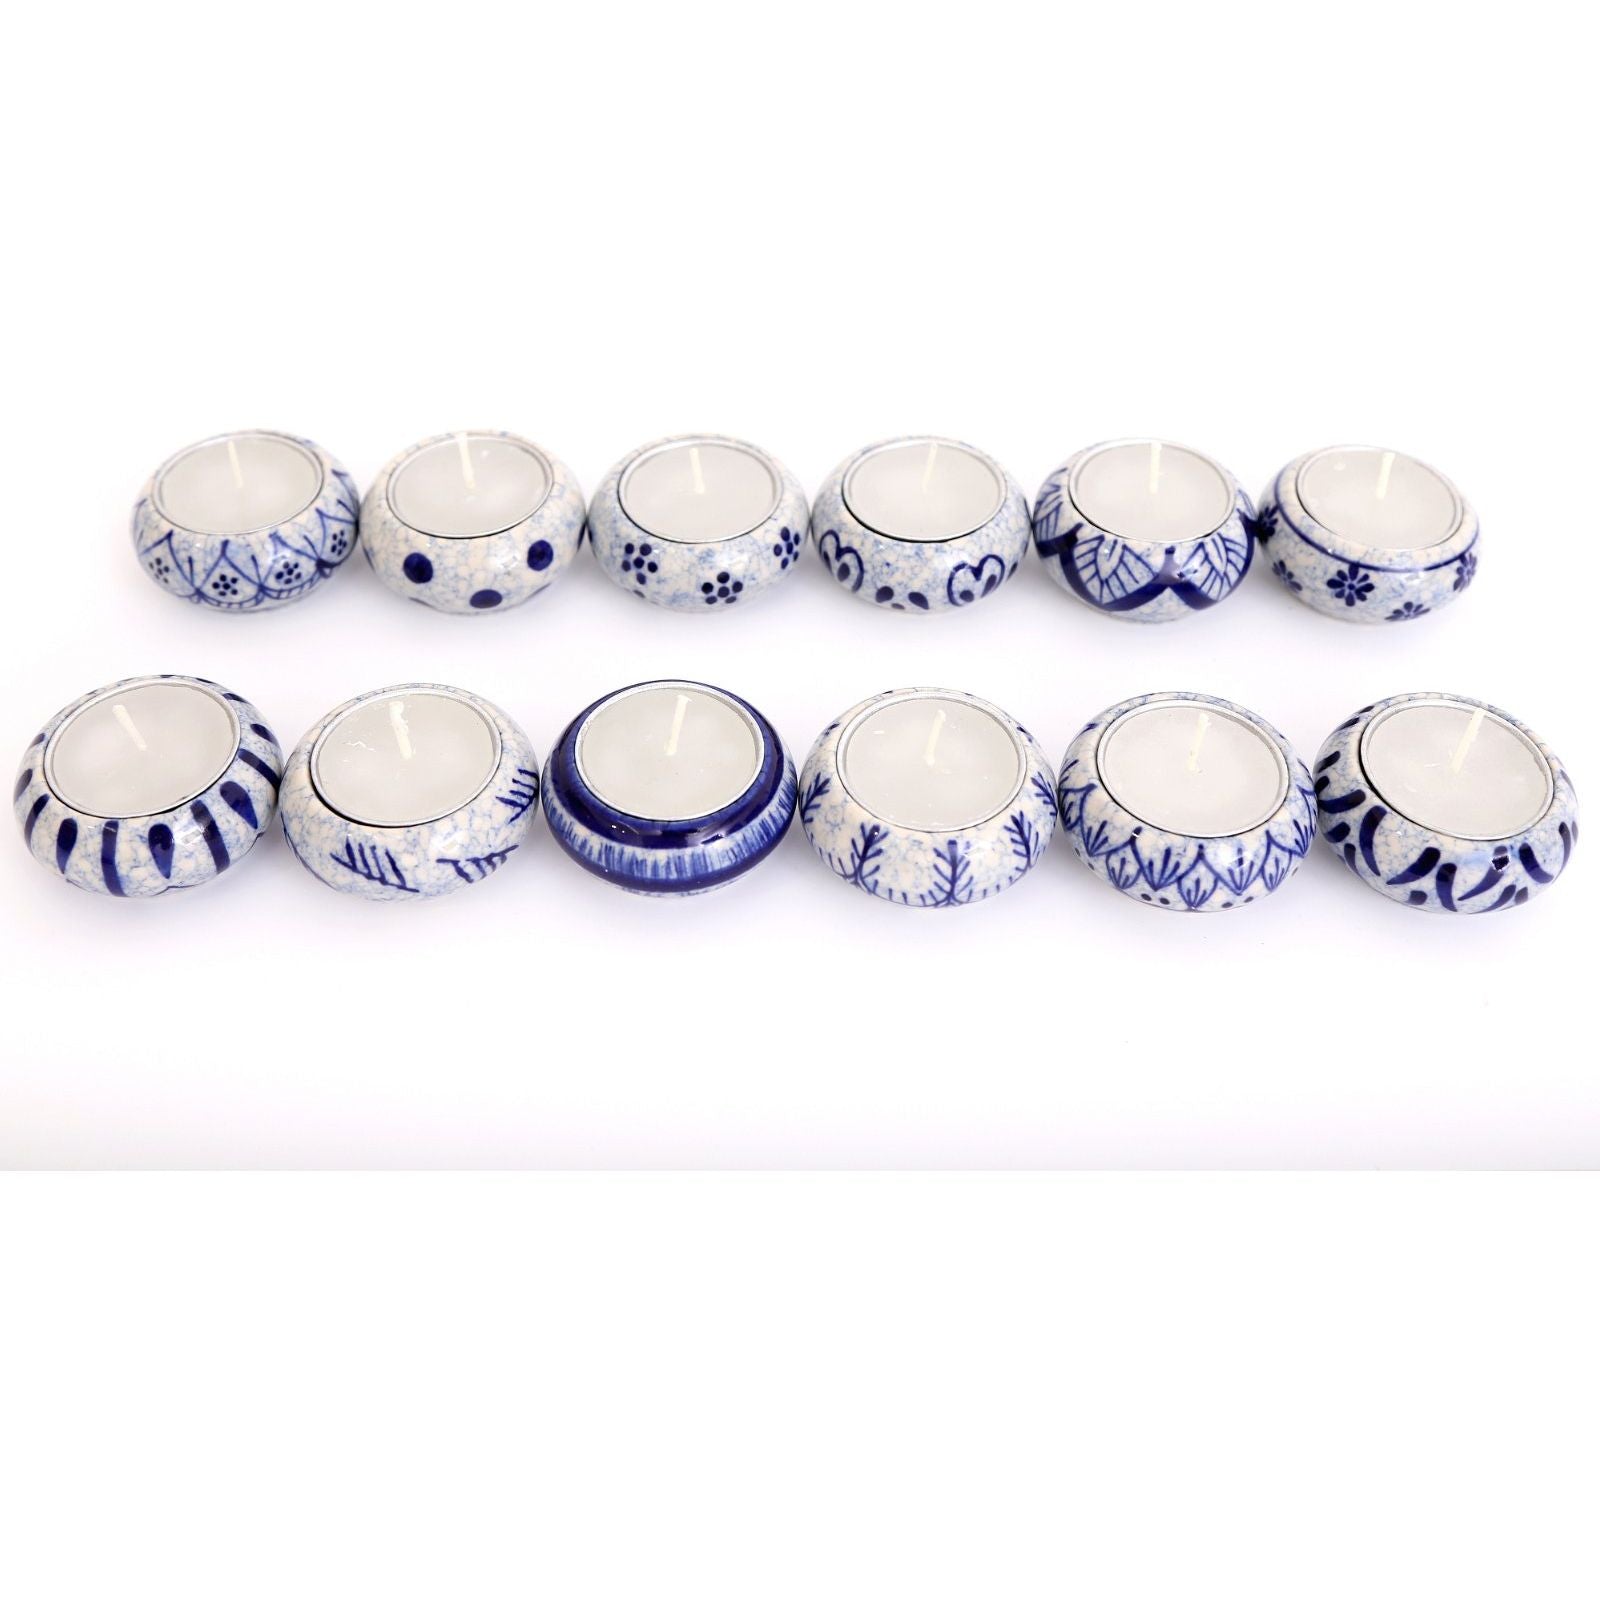 Pack of 12 Ceramic Blue & White Crackle Tealights - Ashton and Finch